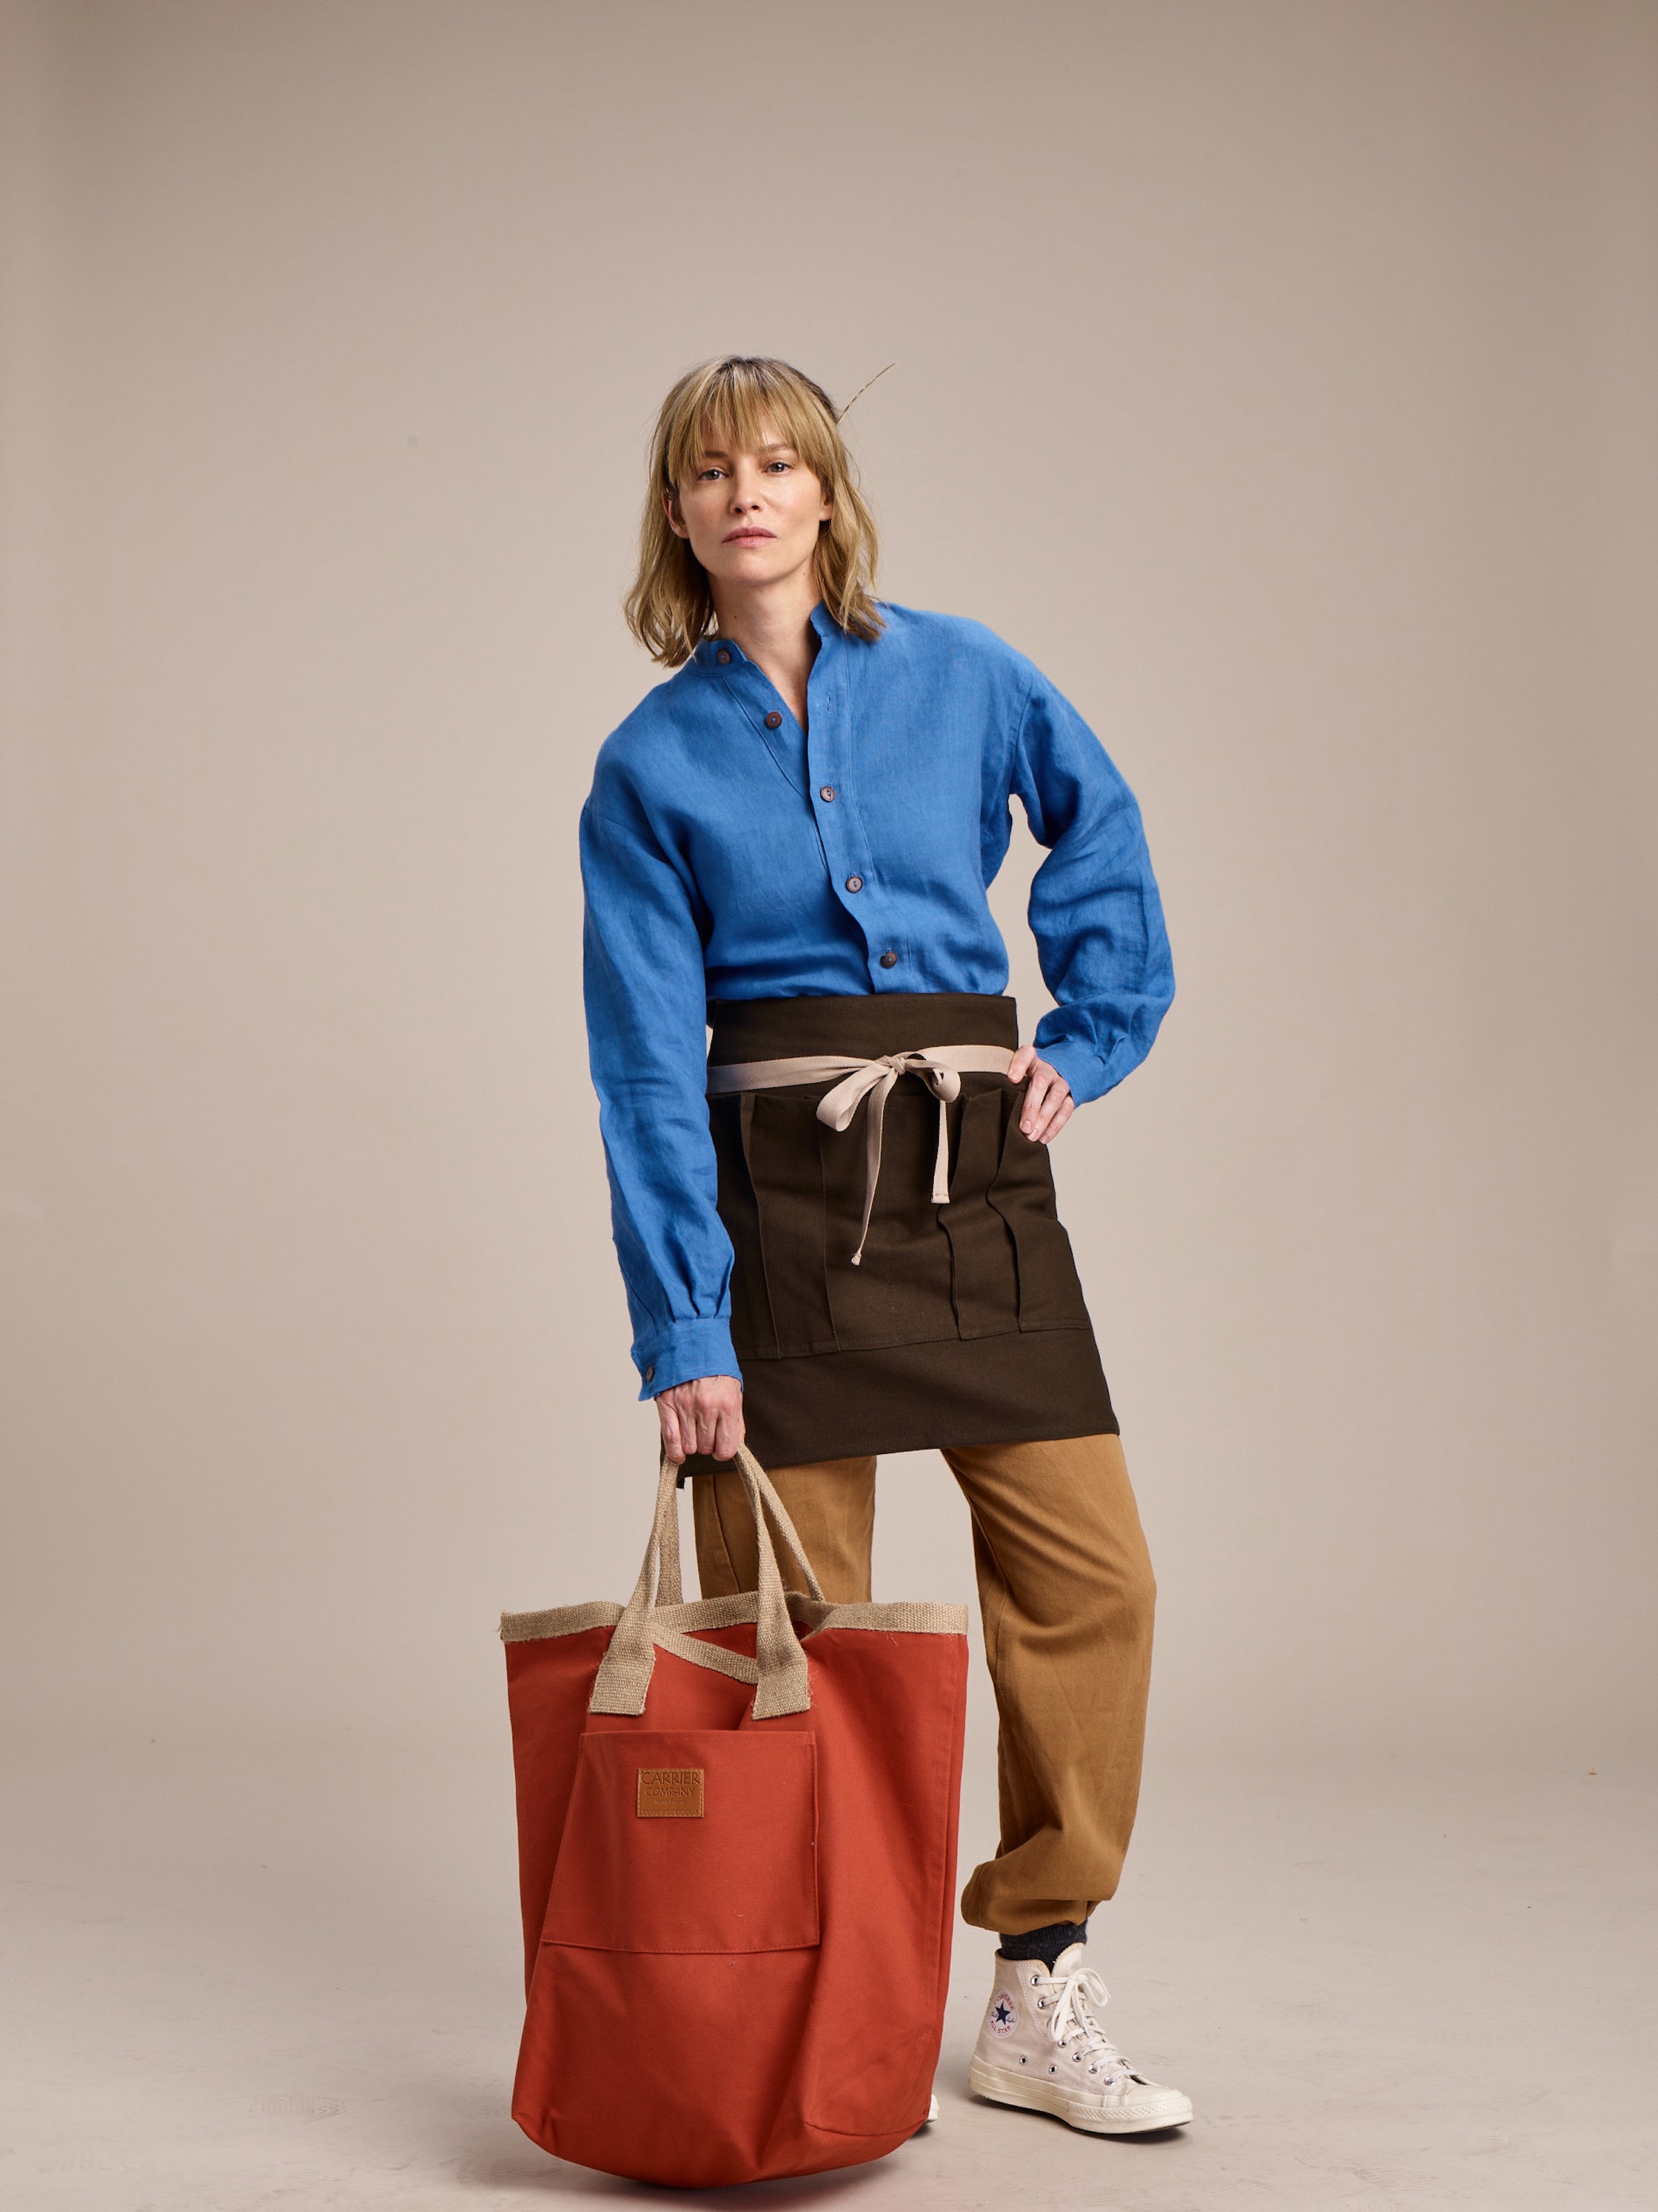 Woman wearing Carrier Company Women's Work Trouser in Tan with Linen Collarless Shirt and Half Apron holding Loot & Boot Bag